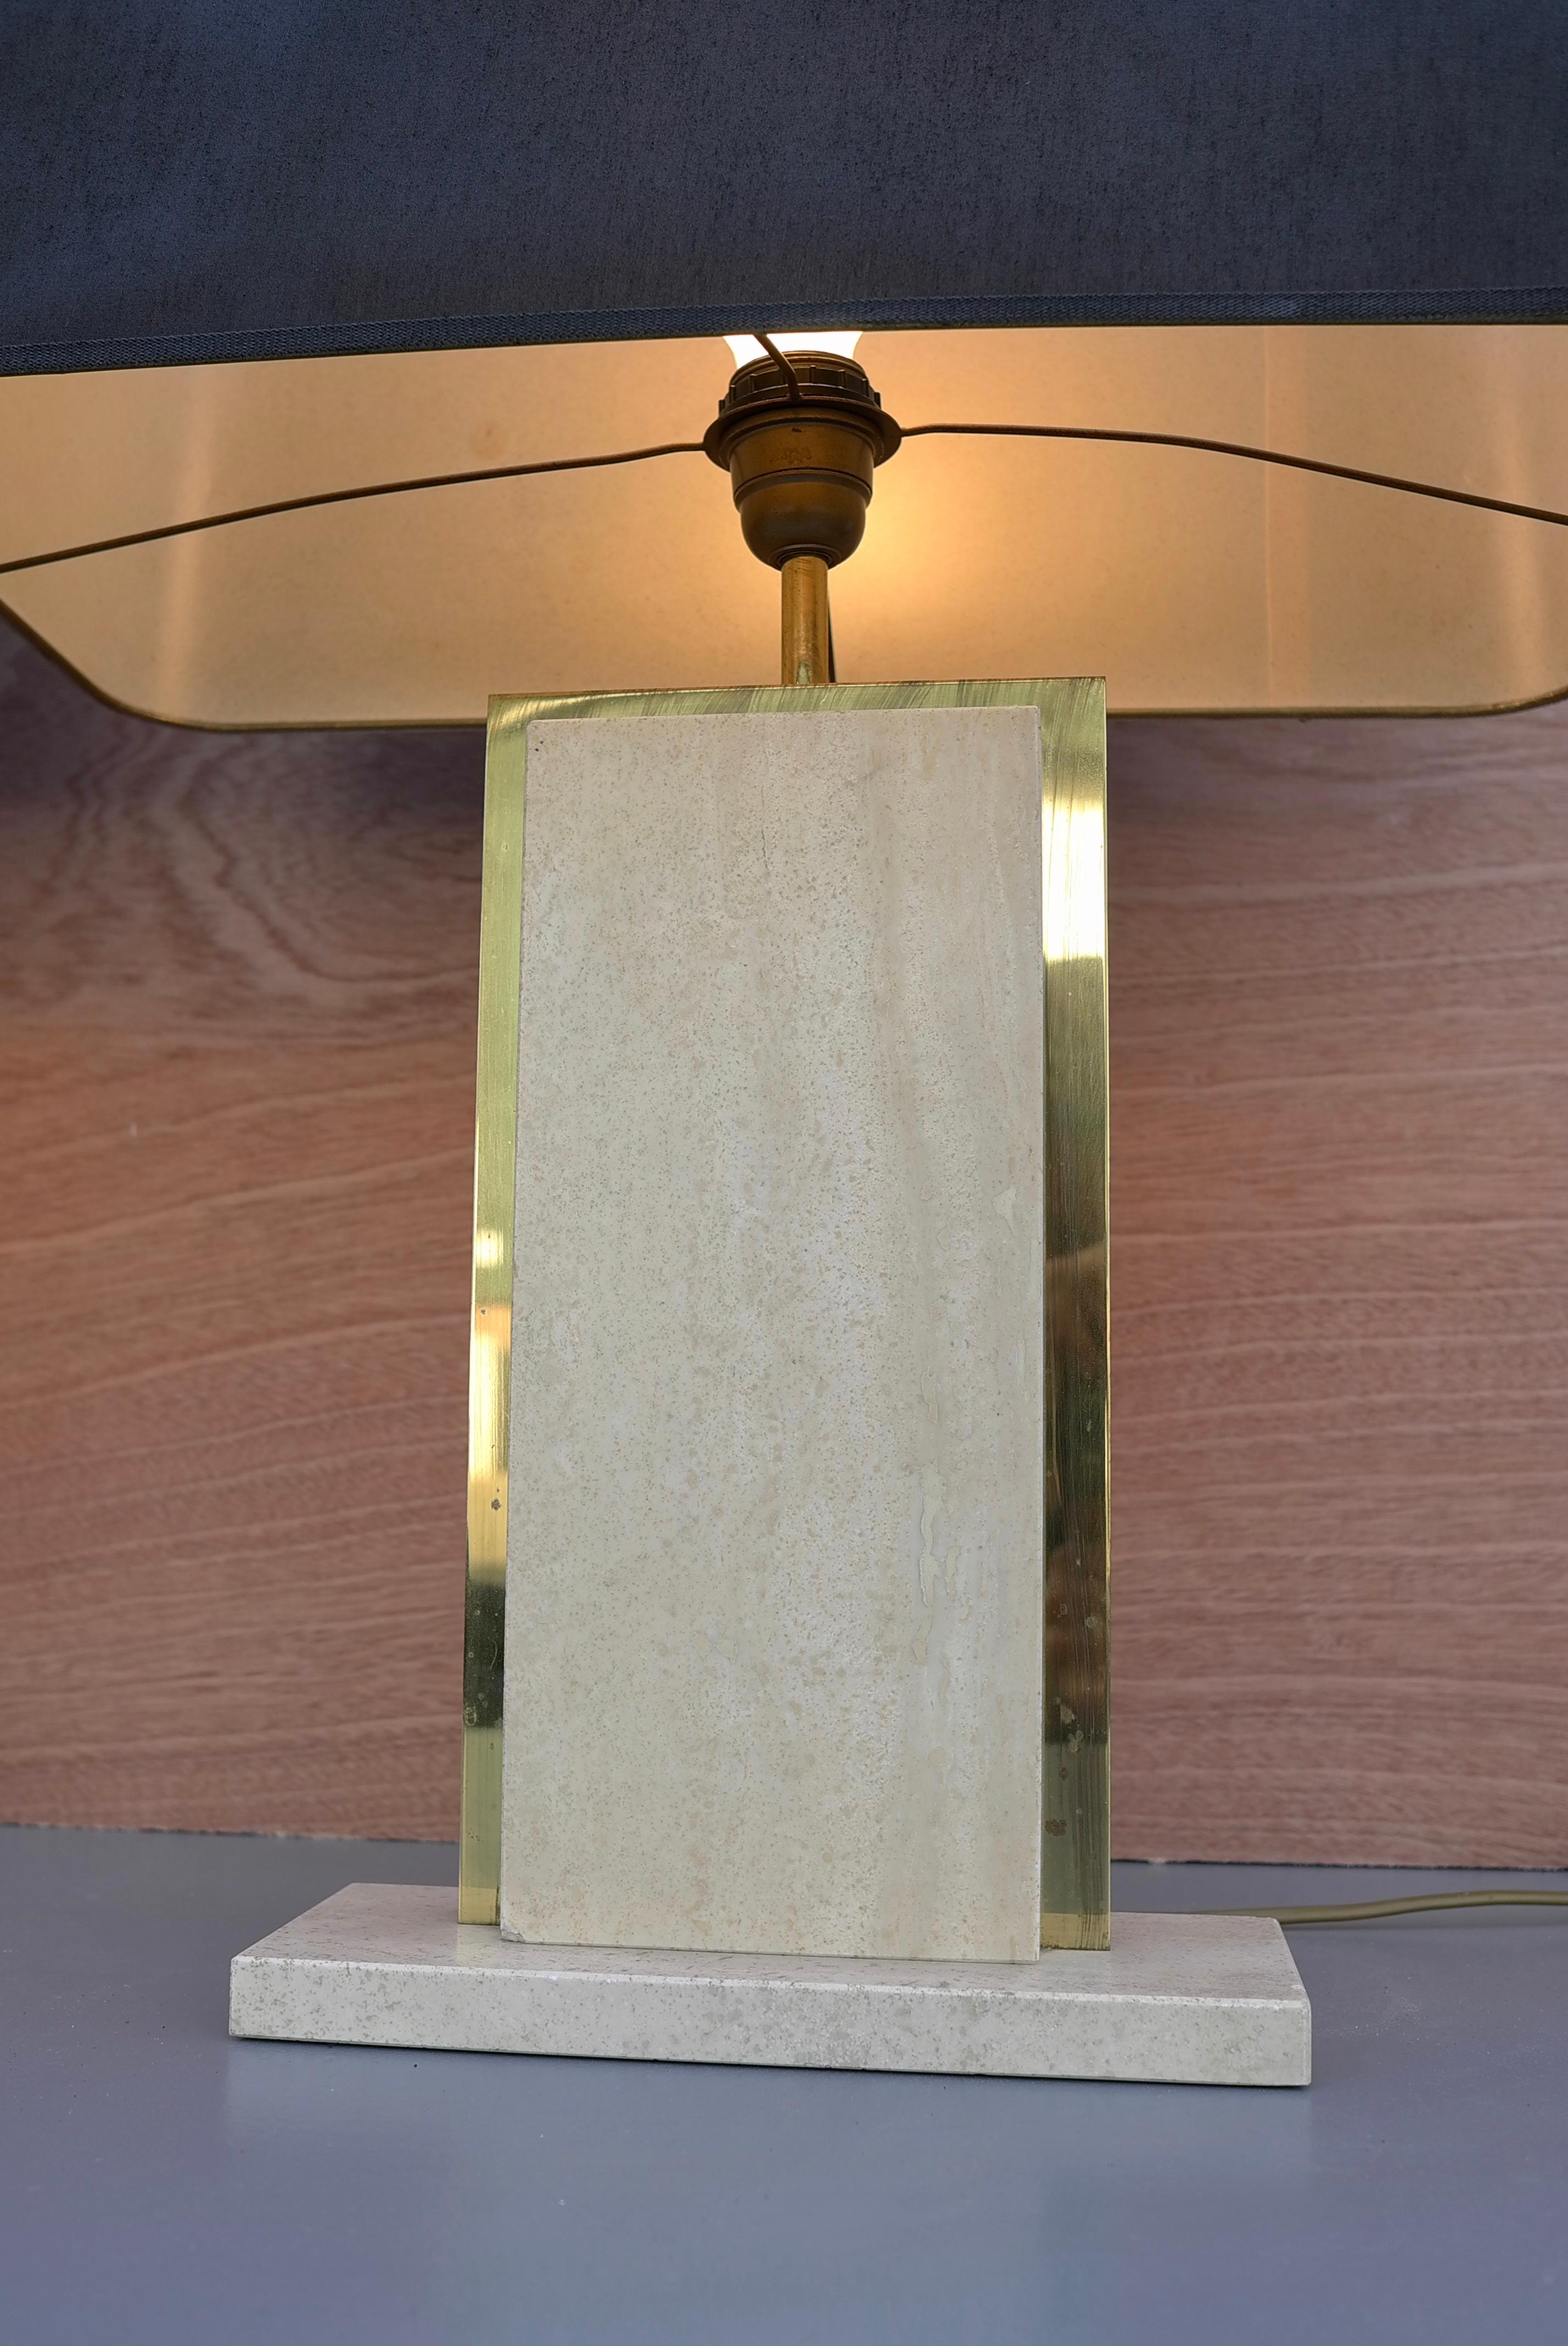 Travertine and brass sculptural Mid-Century Modern table lamps, Belgium 1970's

Size including shade: 75cm height, 47.5 width 12.5cm depth.